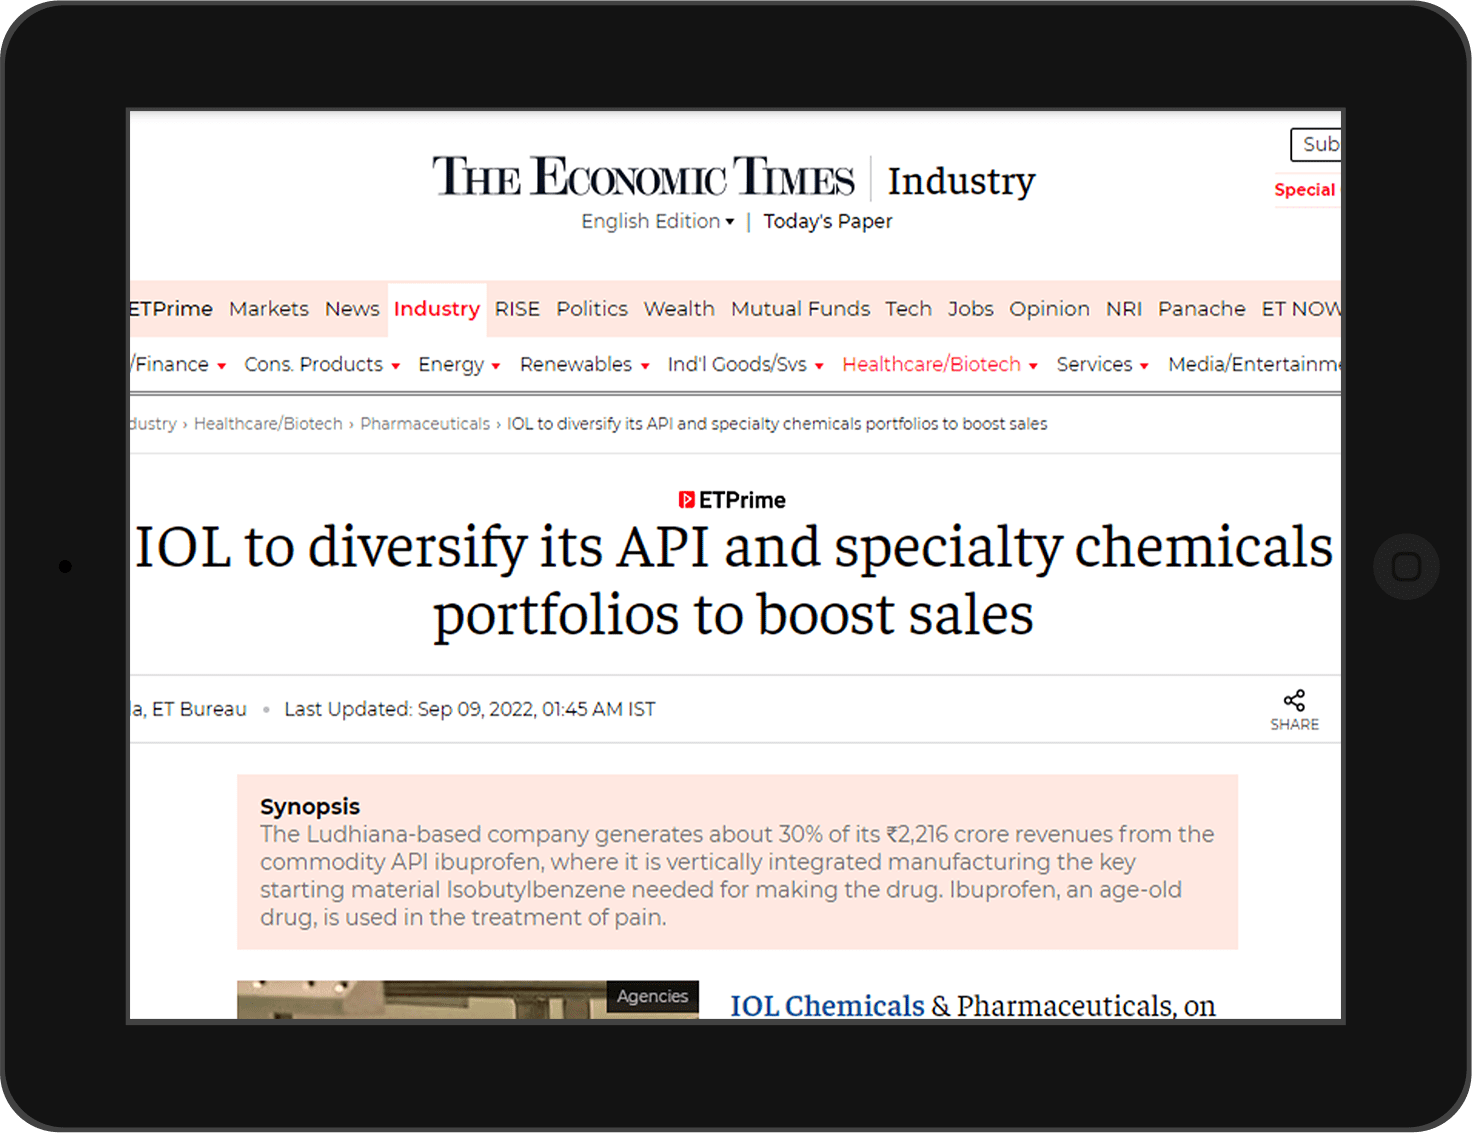 API and specialty chemicals news